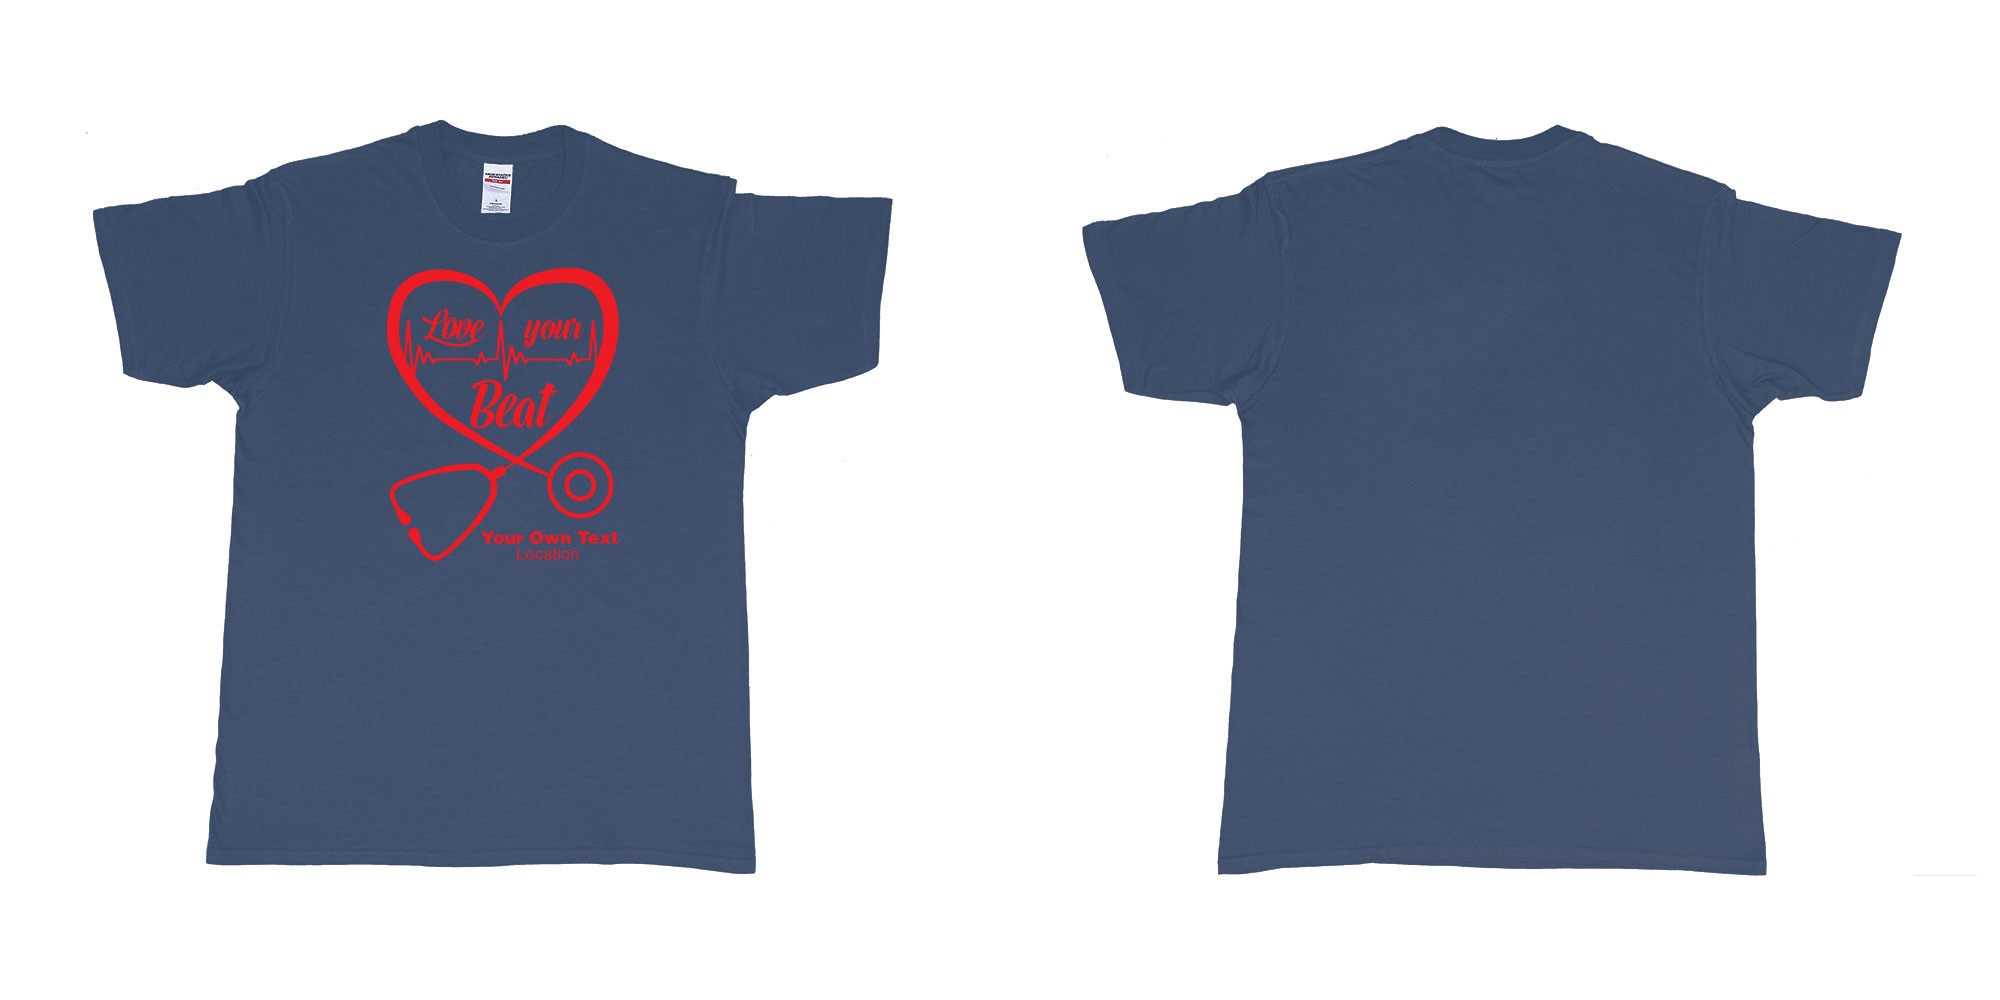 Custom tshirt design stethoscope doctor love your beat hearth custom tshirt print in fabric color navy choice your own text made in Bali by The Pirate Way